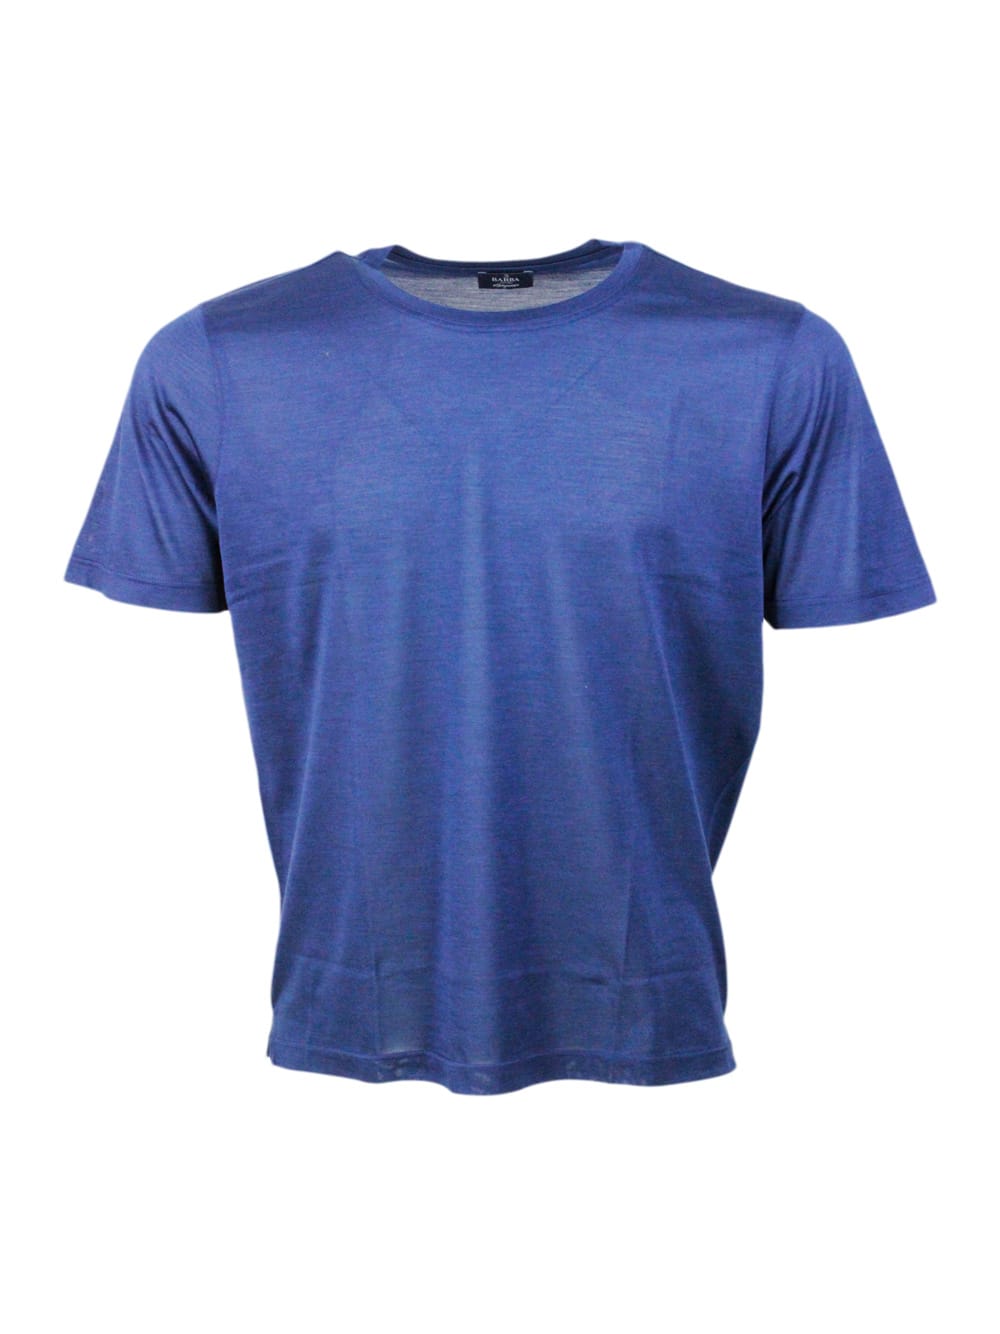 Short-sleeved Crew-neck T-shirt In 100% Luxury Silk With Vents At The Bottom